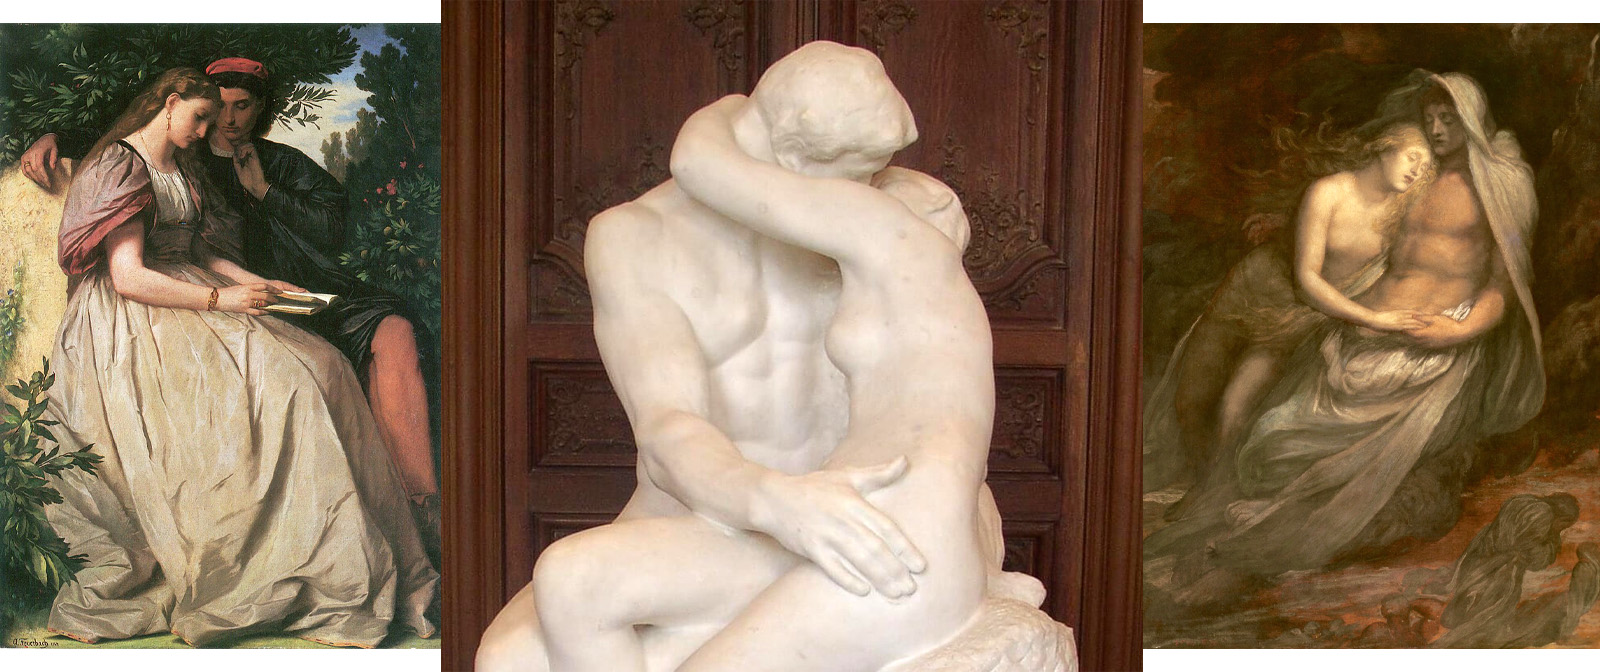 Evocative and provocative. What is so special about Rodin's sculpture 